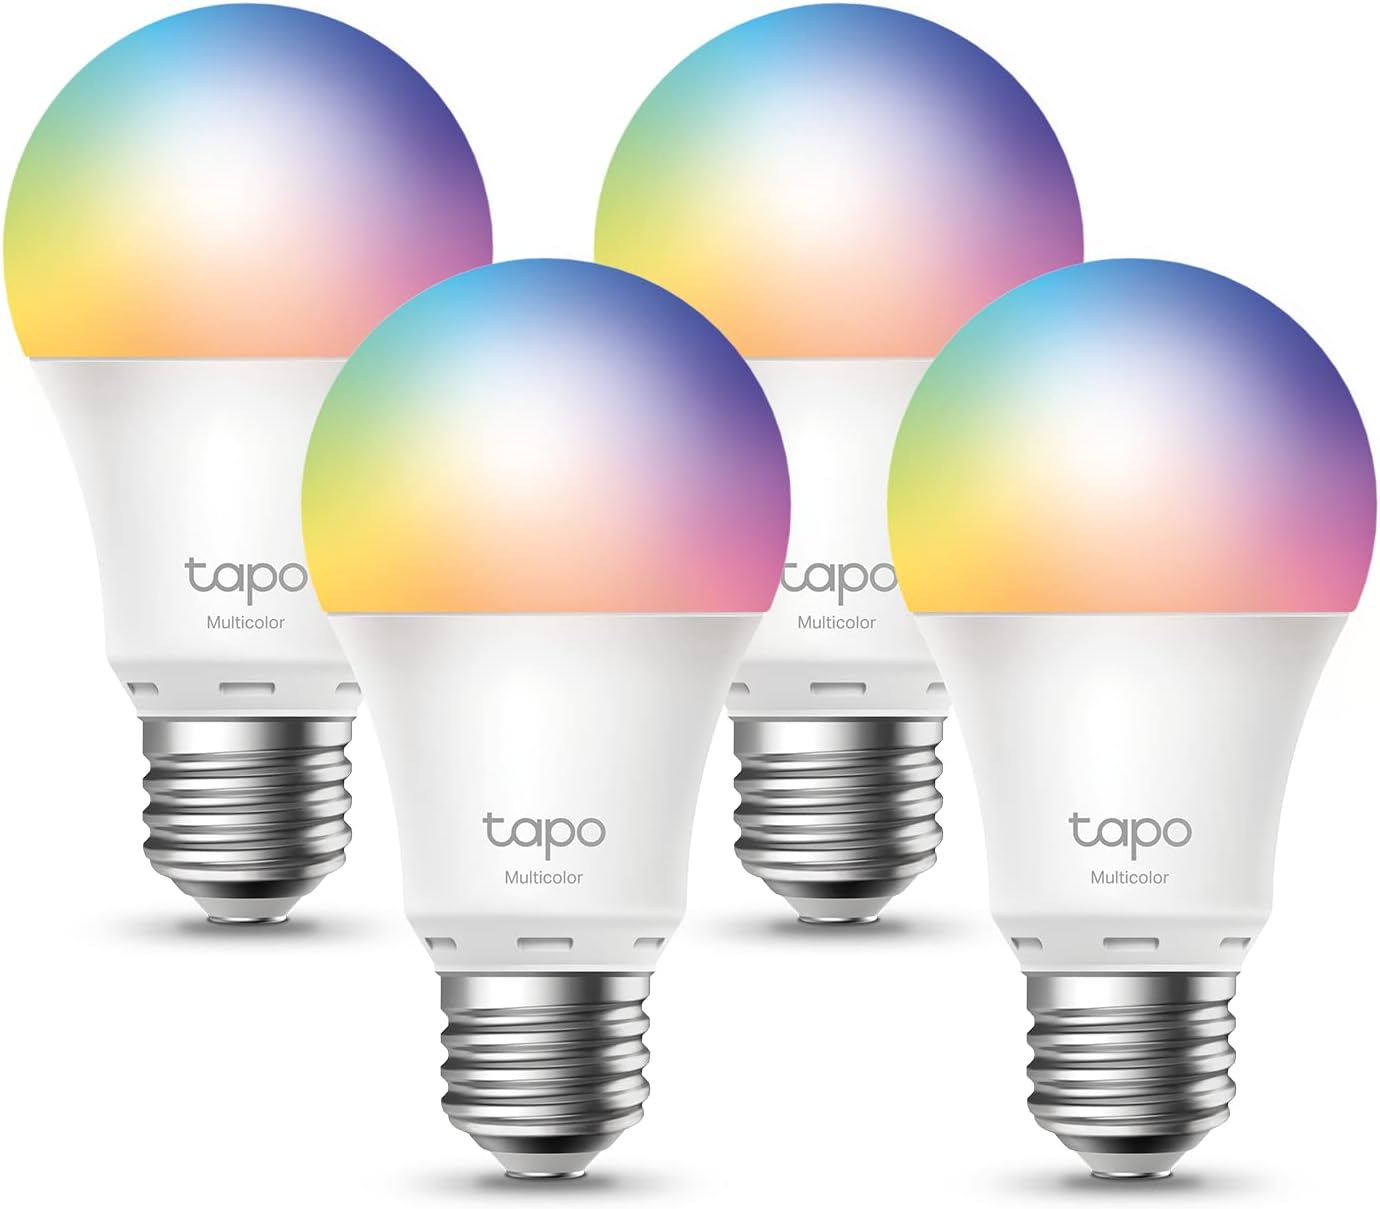 A research paper found TP-Link's Tapo L530E smart bulb suffers four security flaws.